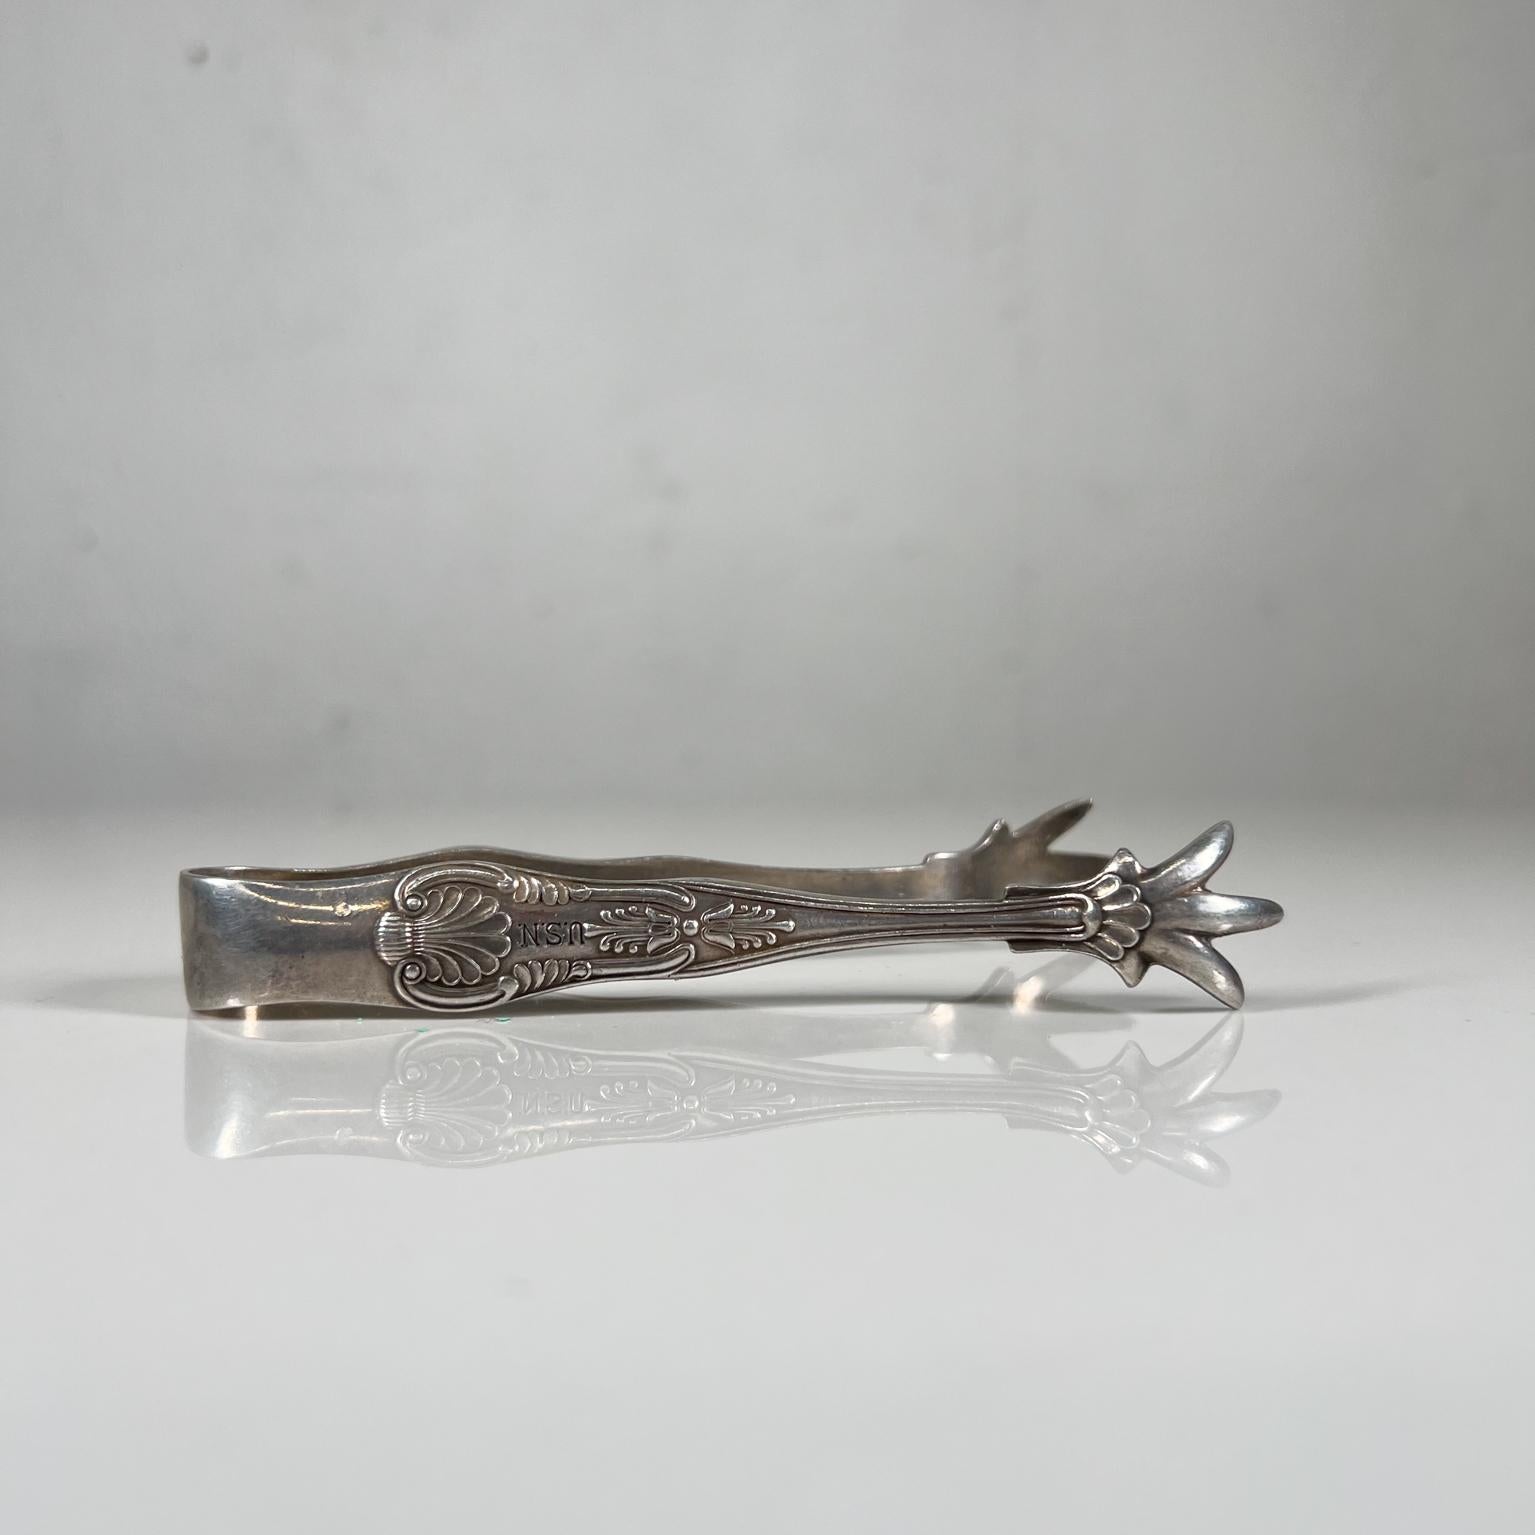 Vintage USN silver claw sugar ice tongs decorative design Eagle
Measures: 4.5 Long x .63 tall x 2 width
Small tongs for sugar or ice cubes.
Stamped-marked USN
Beautiful decorative claw details
Preowned vintage unrestored, refer to images